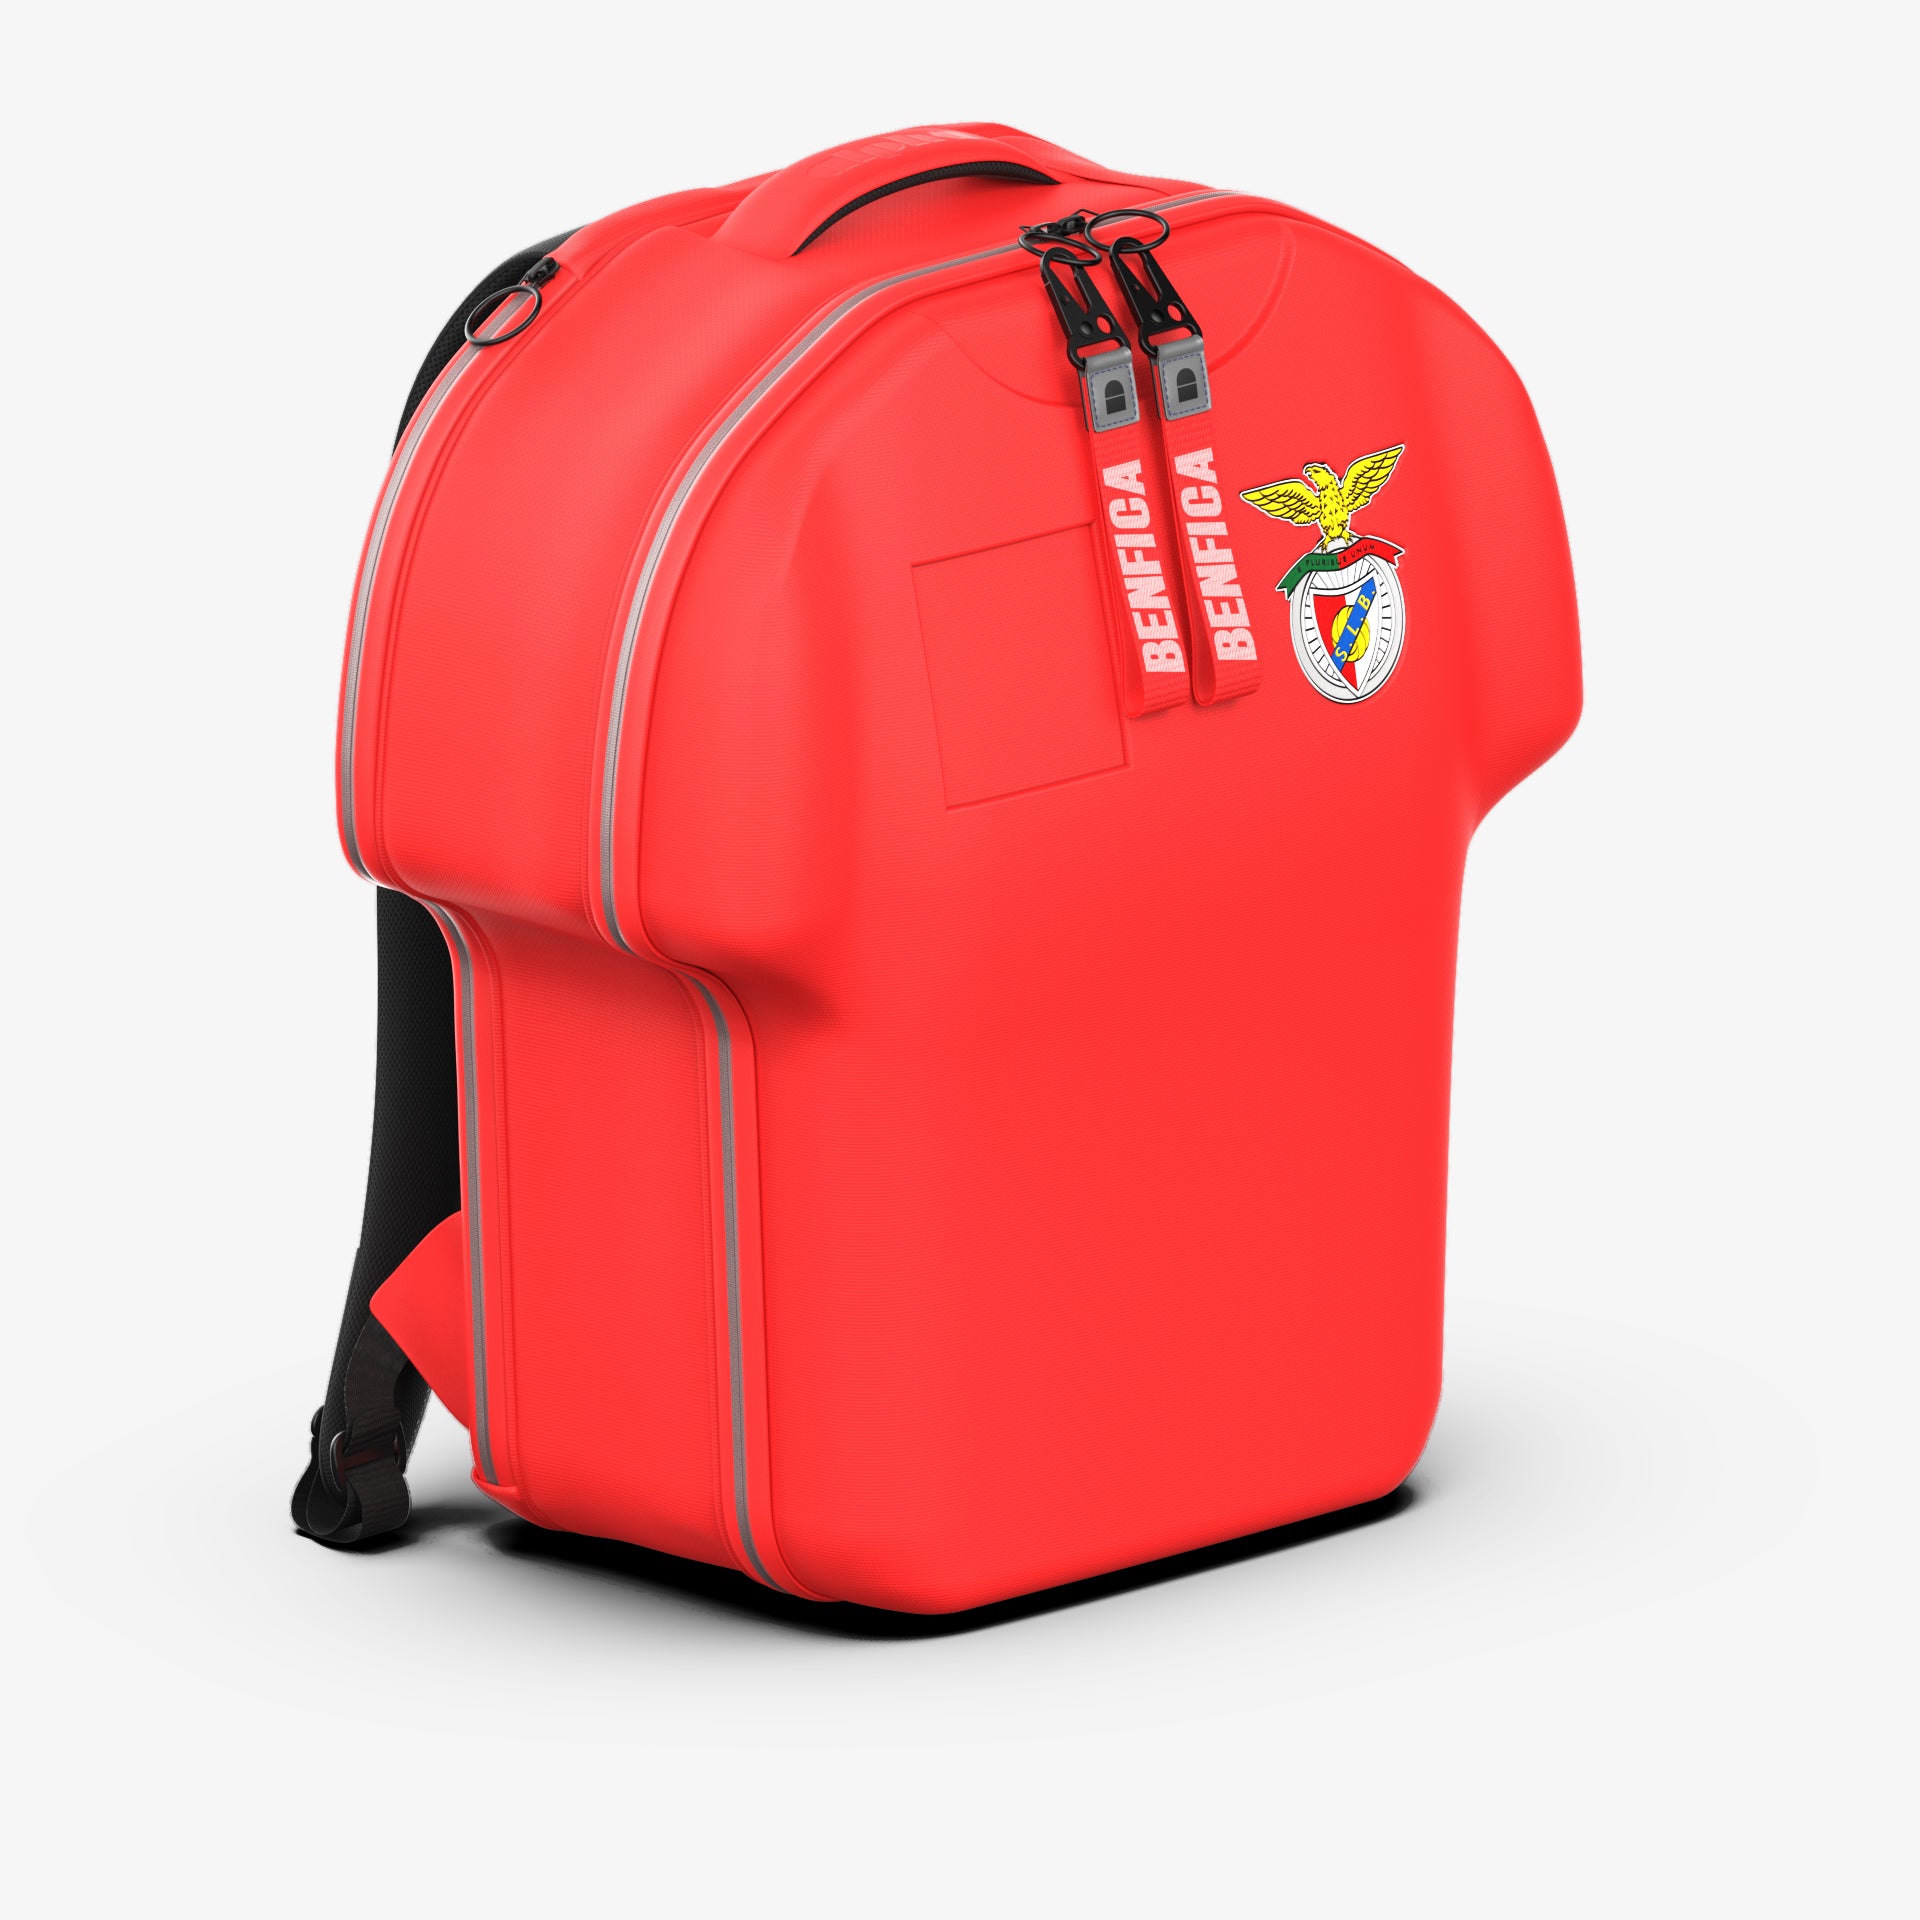 Benfica backpack size large